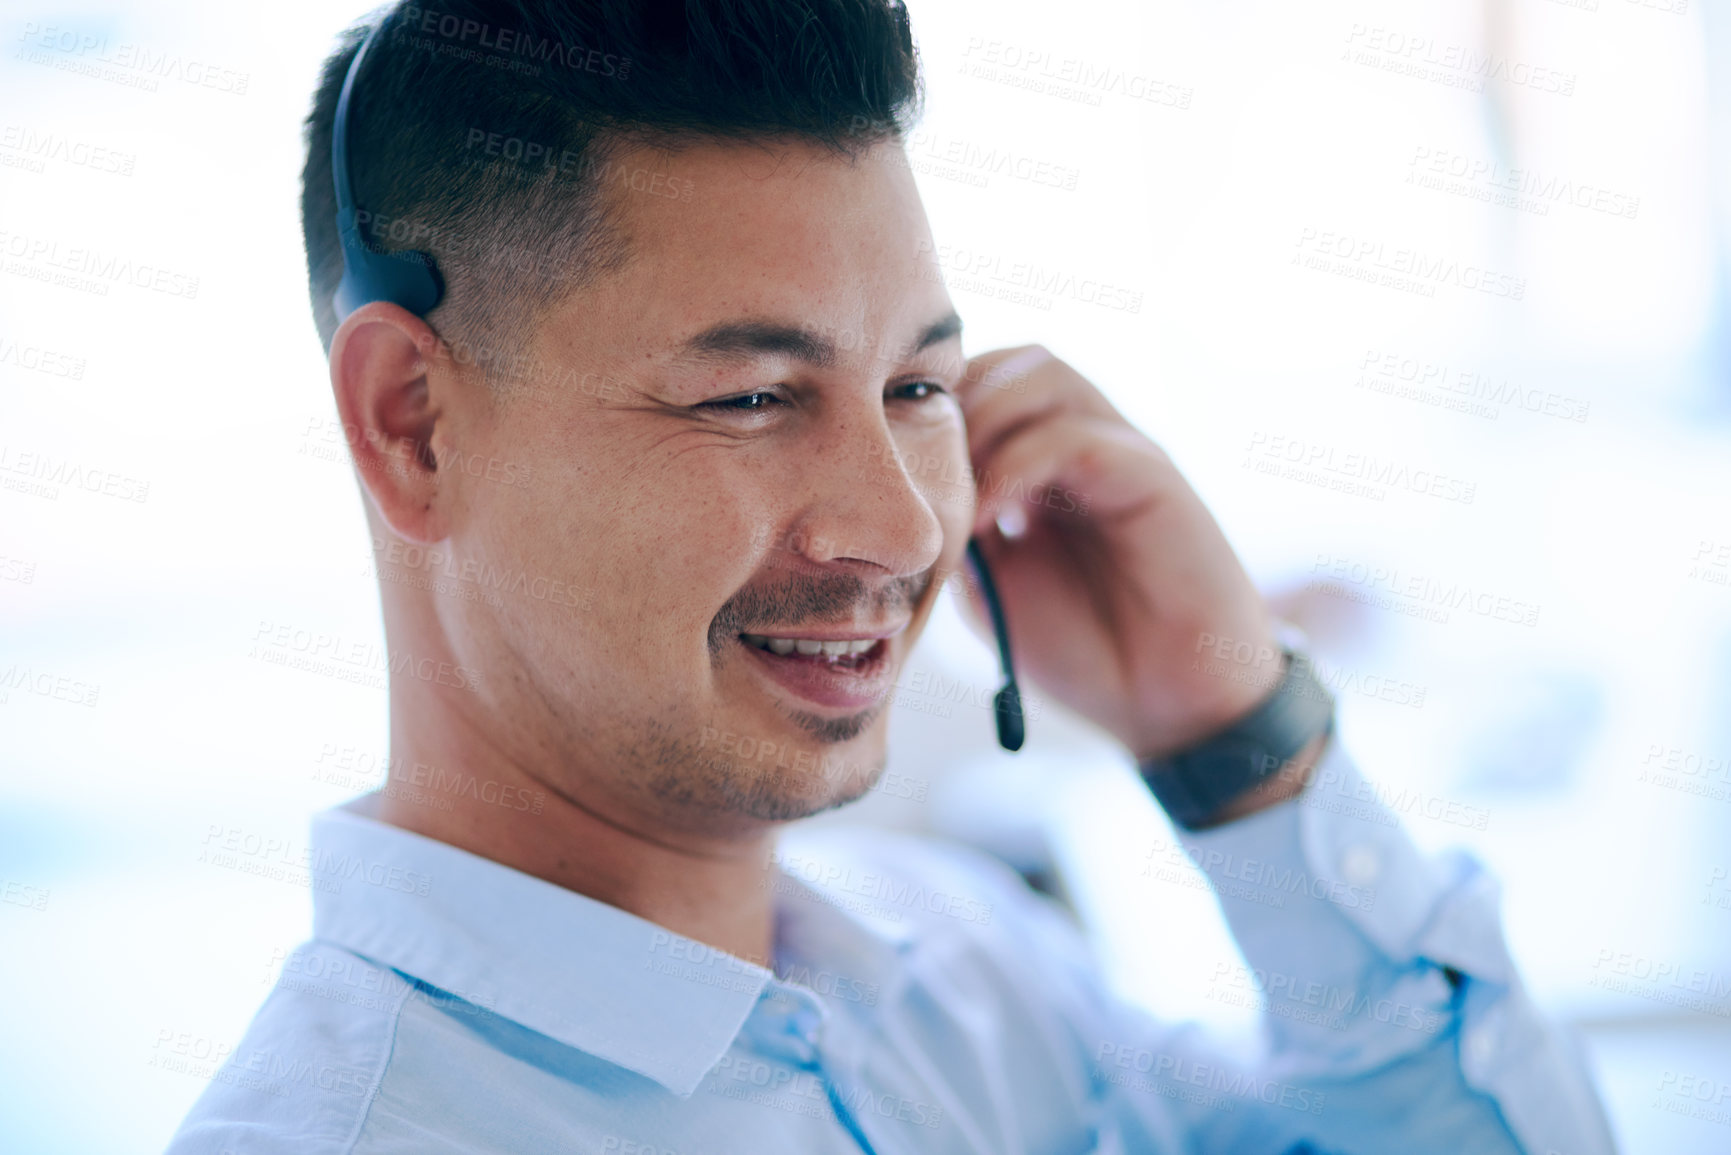 Buy stock photo Shot of a young man using a headset in a modern office